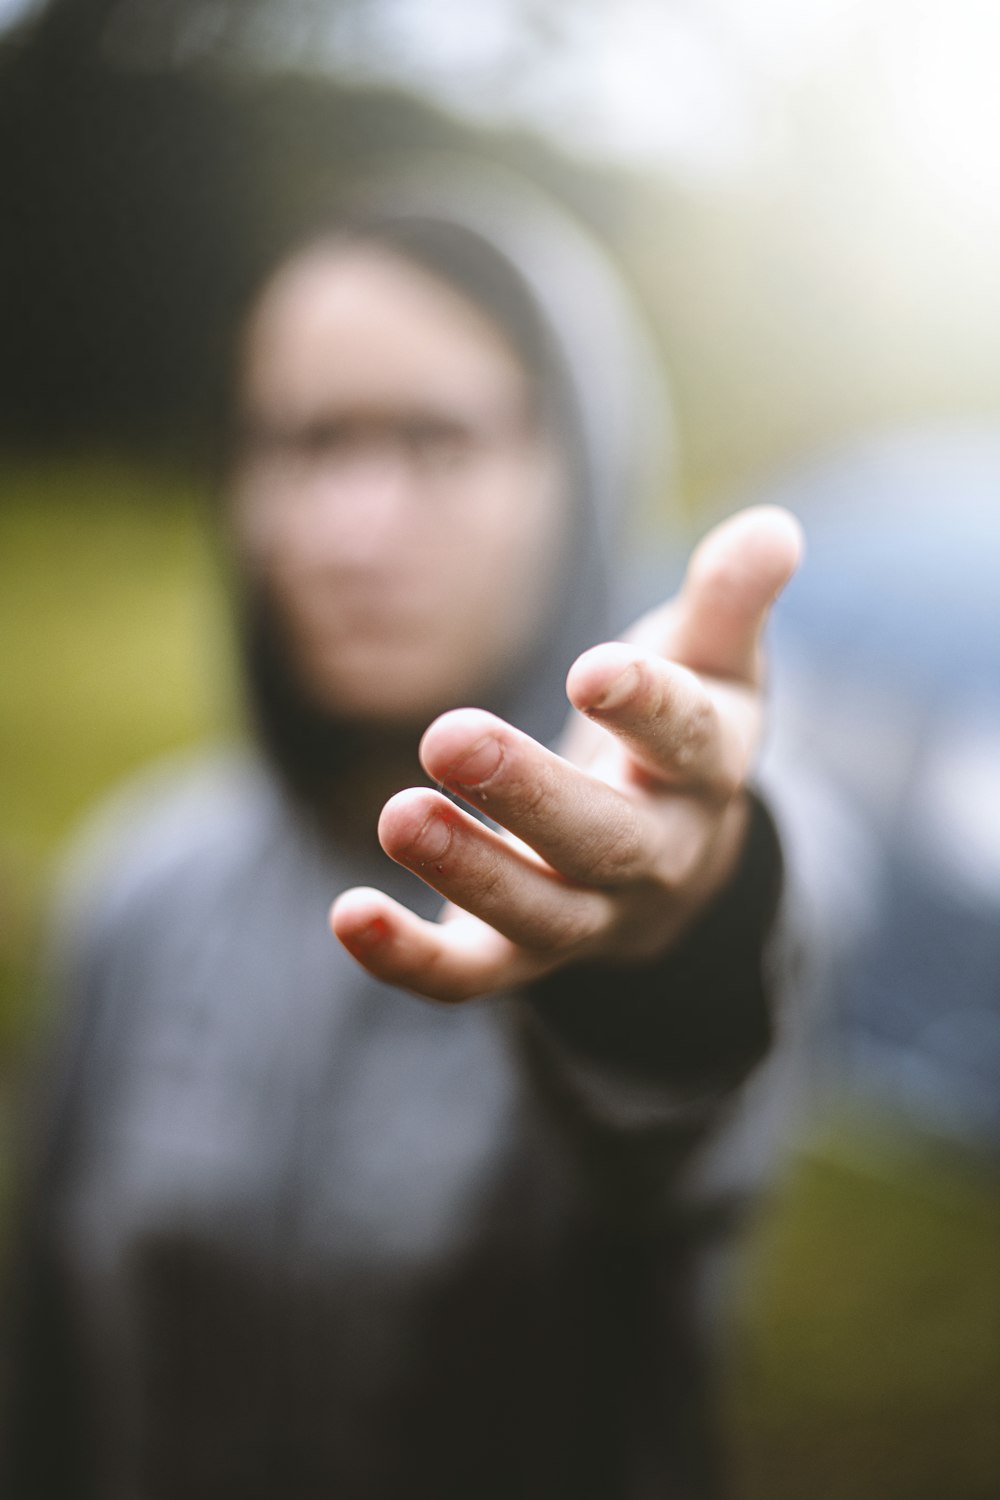 a blurry image of a person holding out their hand